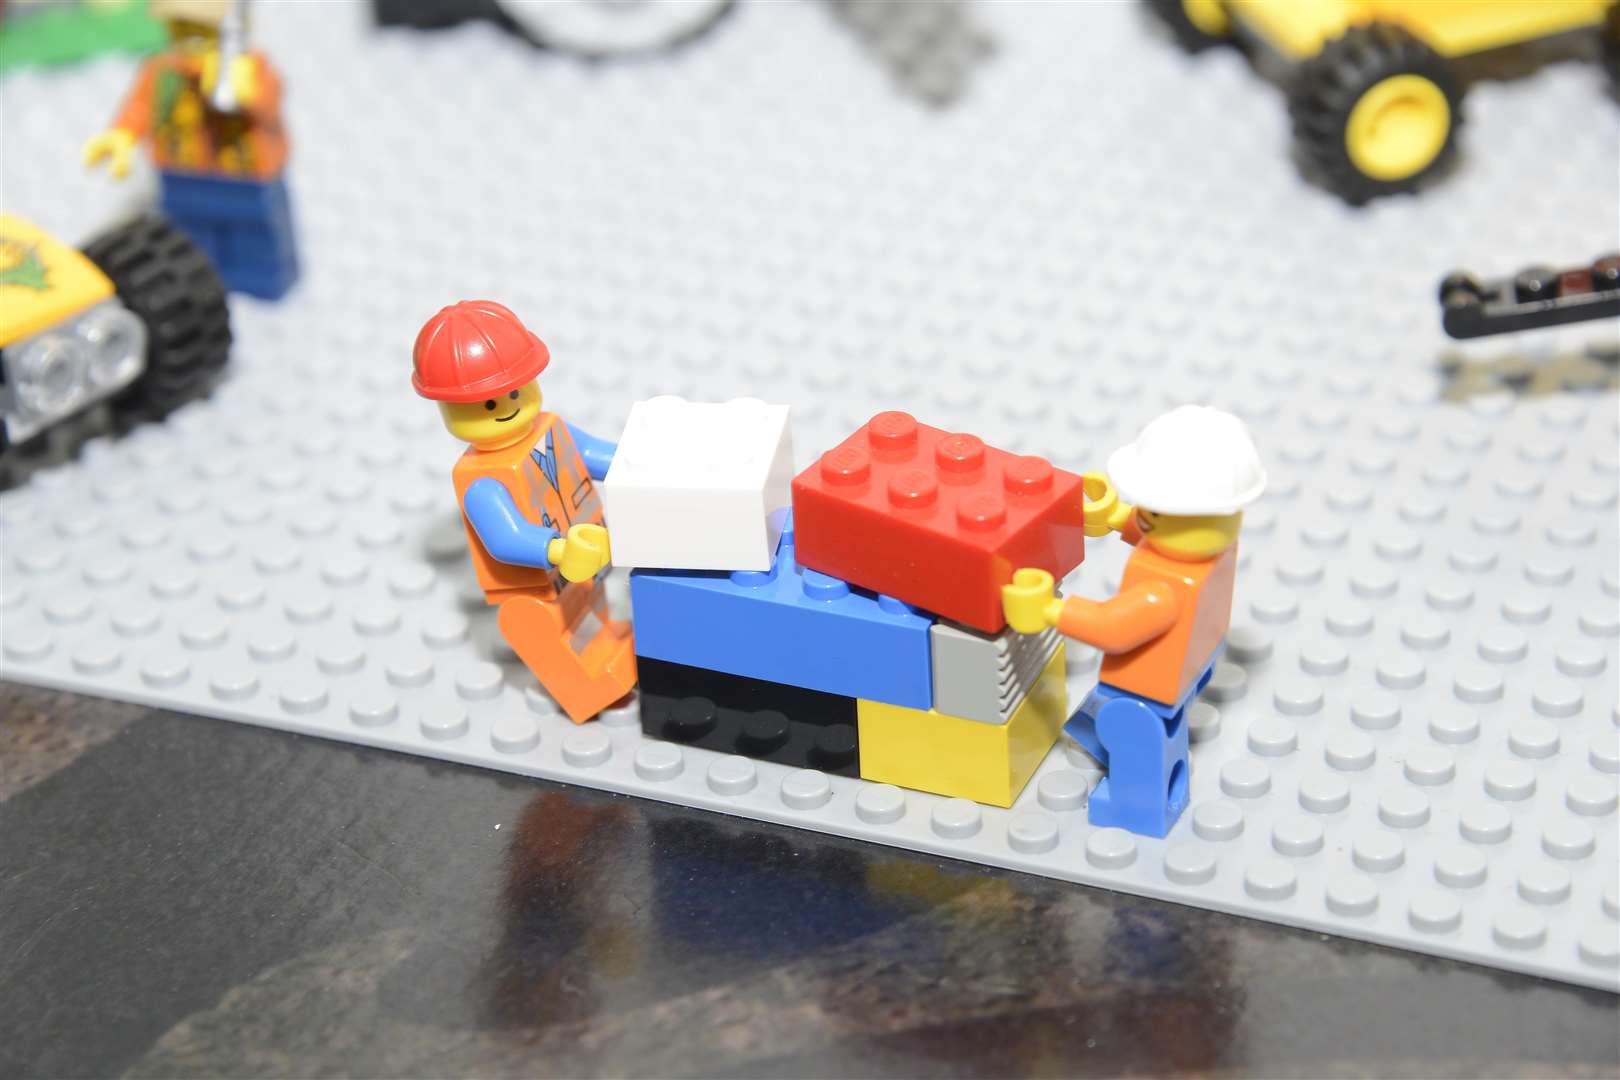 Brick builders are being invited to a toy shop's special event